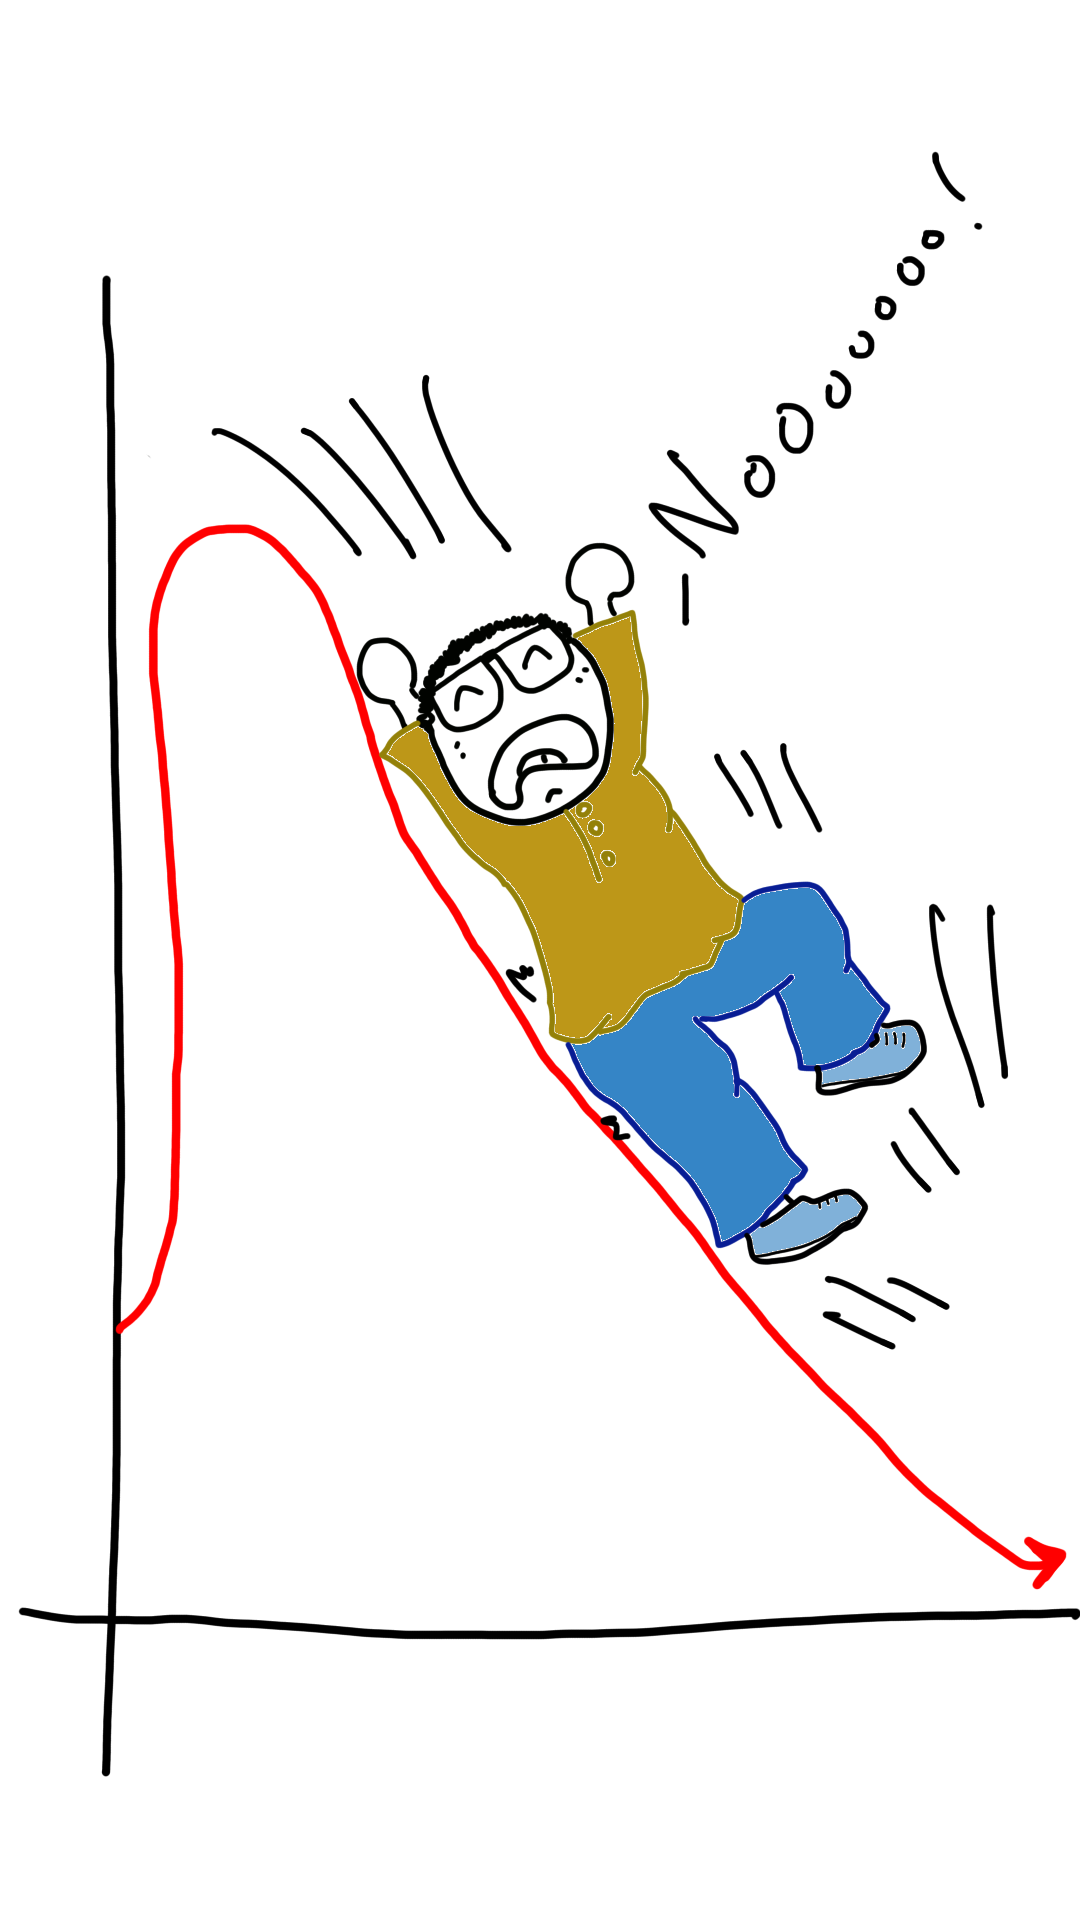 The image shows comic sam sliding down a graph chart which represents the economy pointing down towards a recession. While sliding, comic sam is screaming 'NOOOOO!'